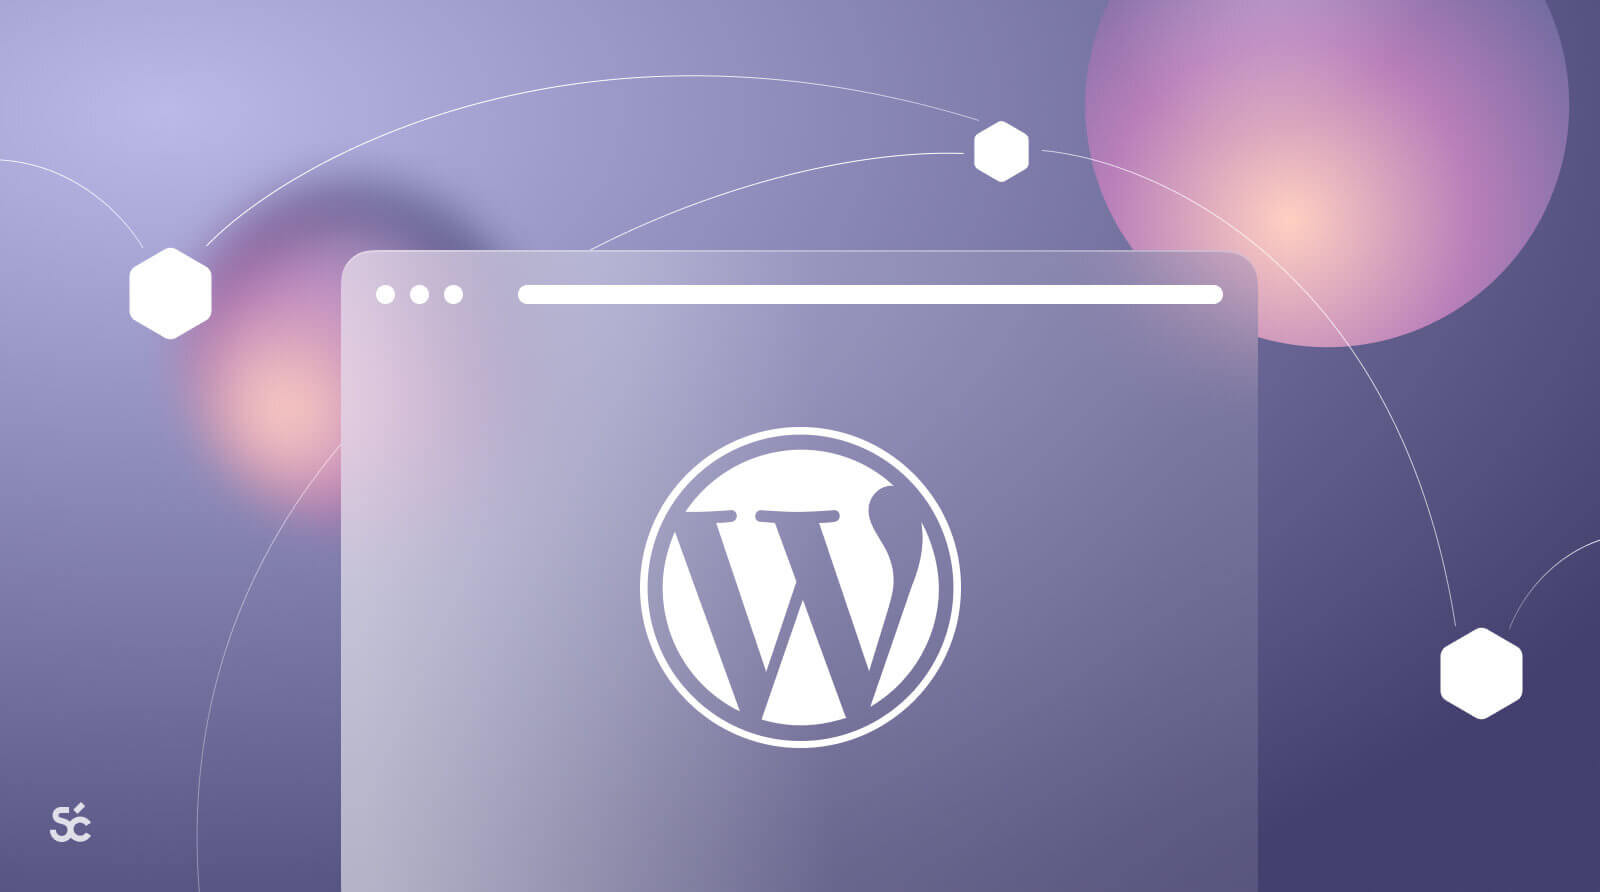 WordPress localization made easy: best practices, how-to, challenges, great examples